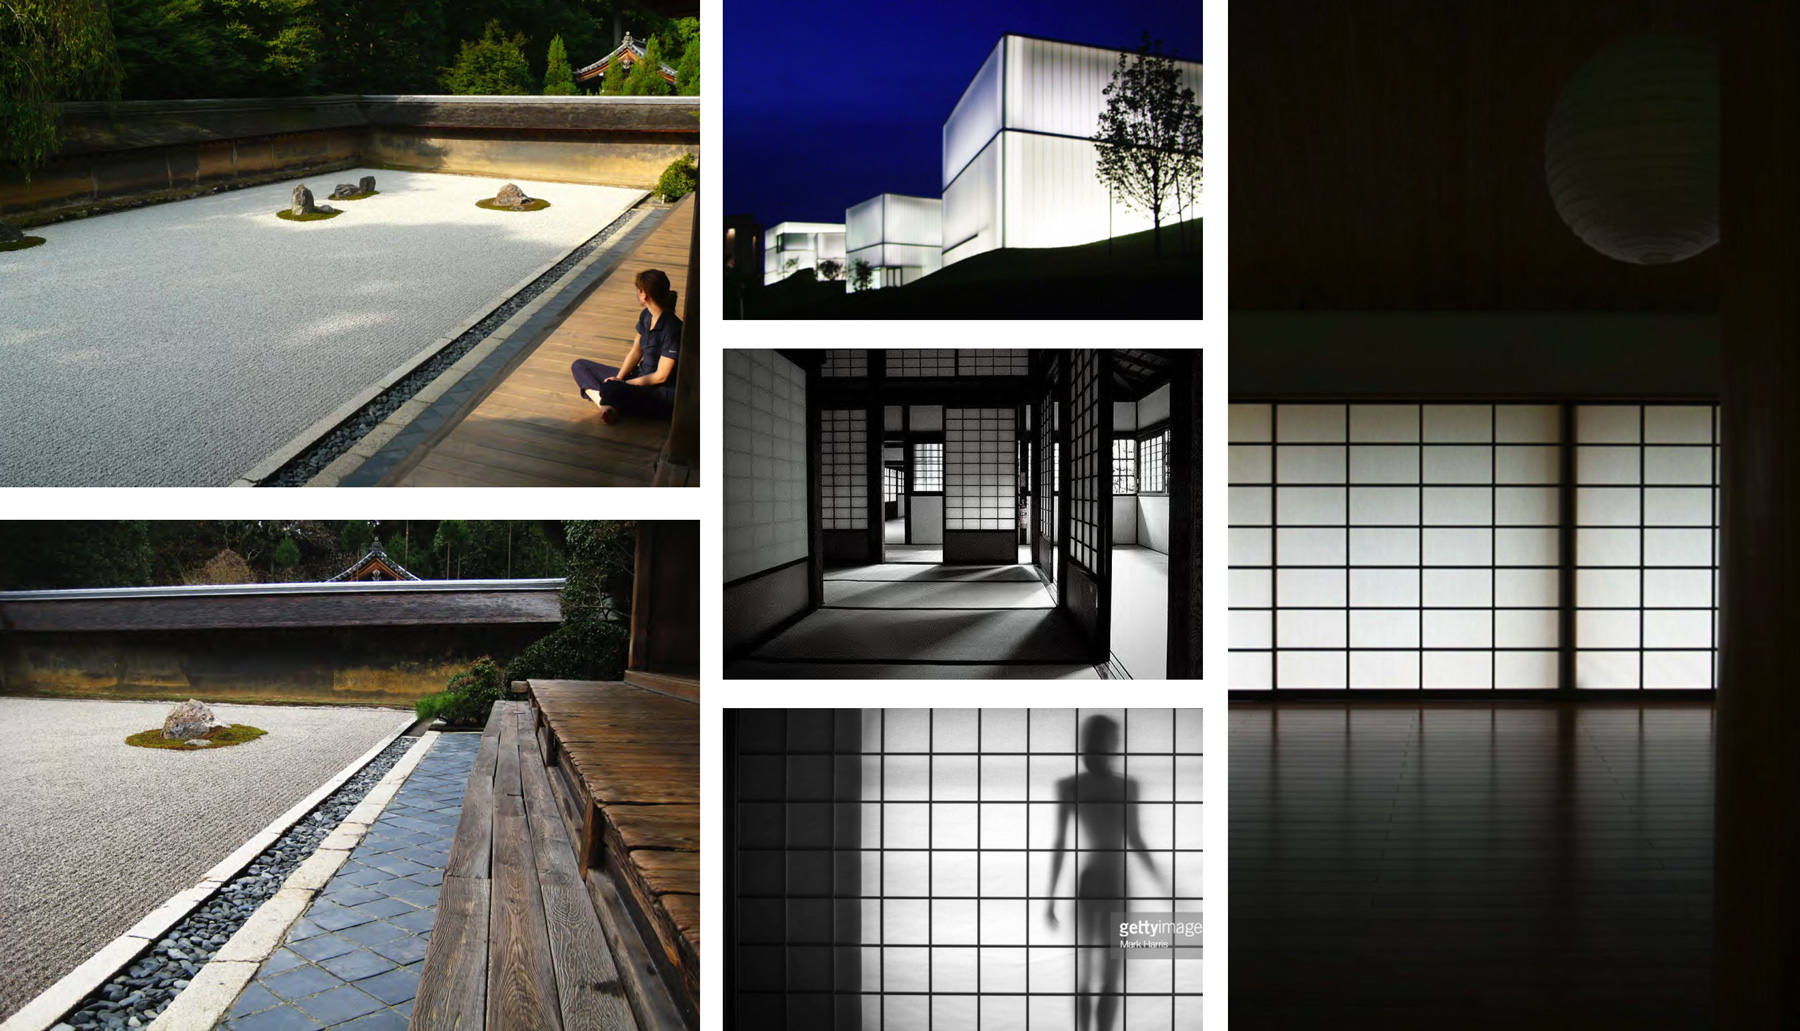 Precedents to incorporate a Japanese minimalist aesthetic.